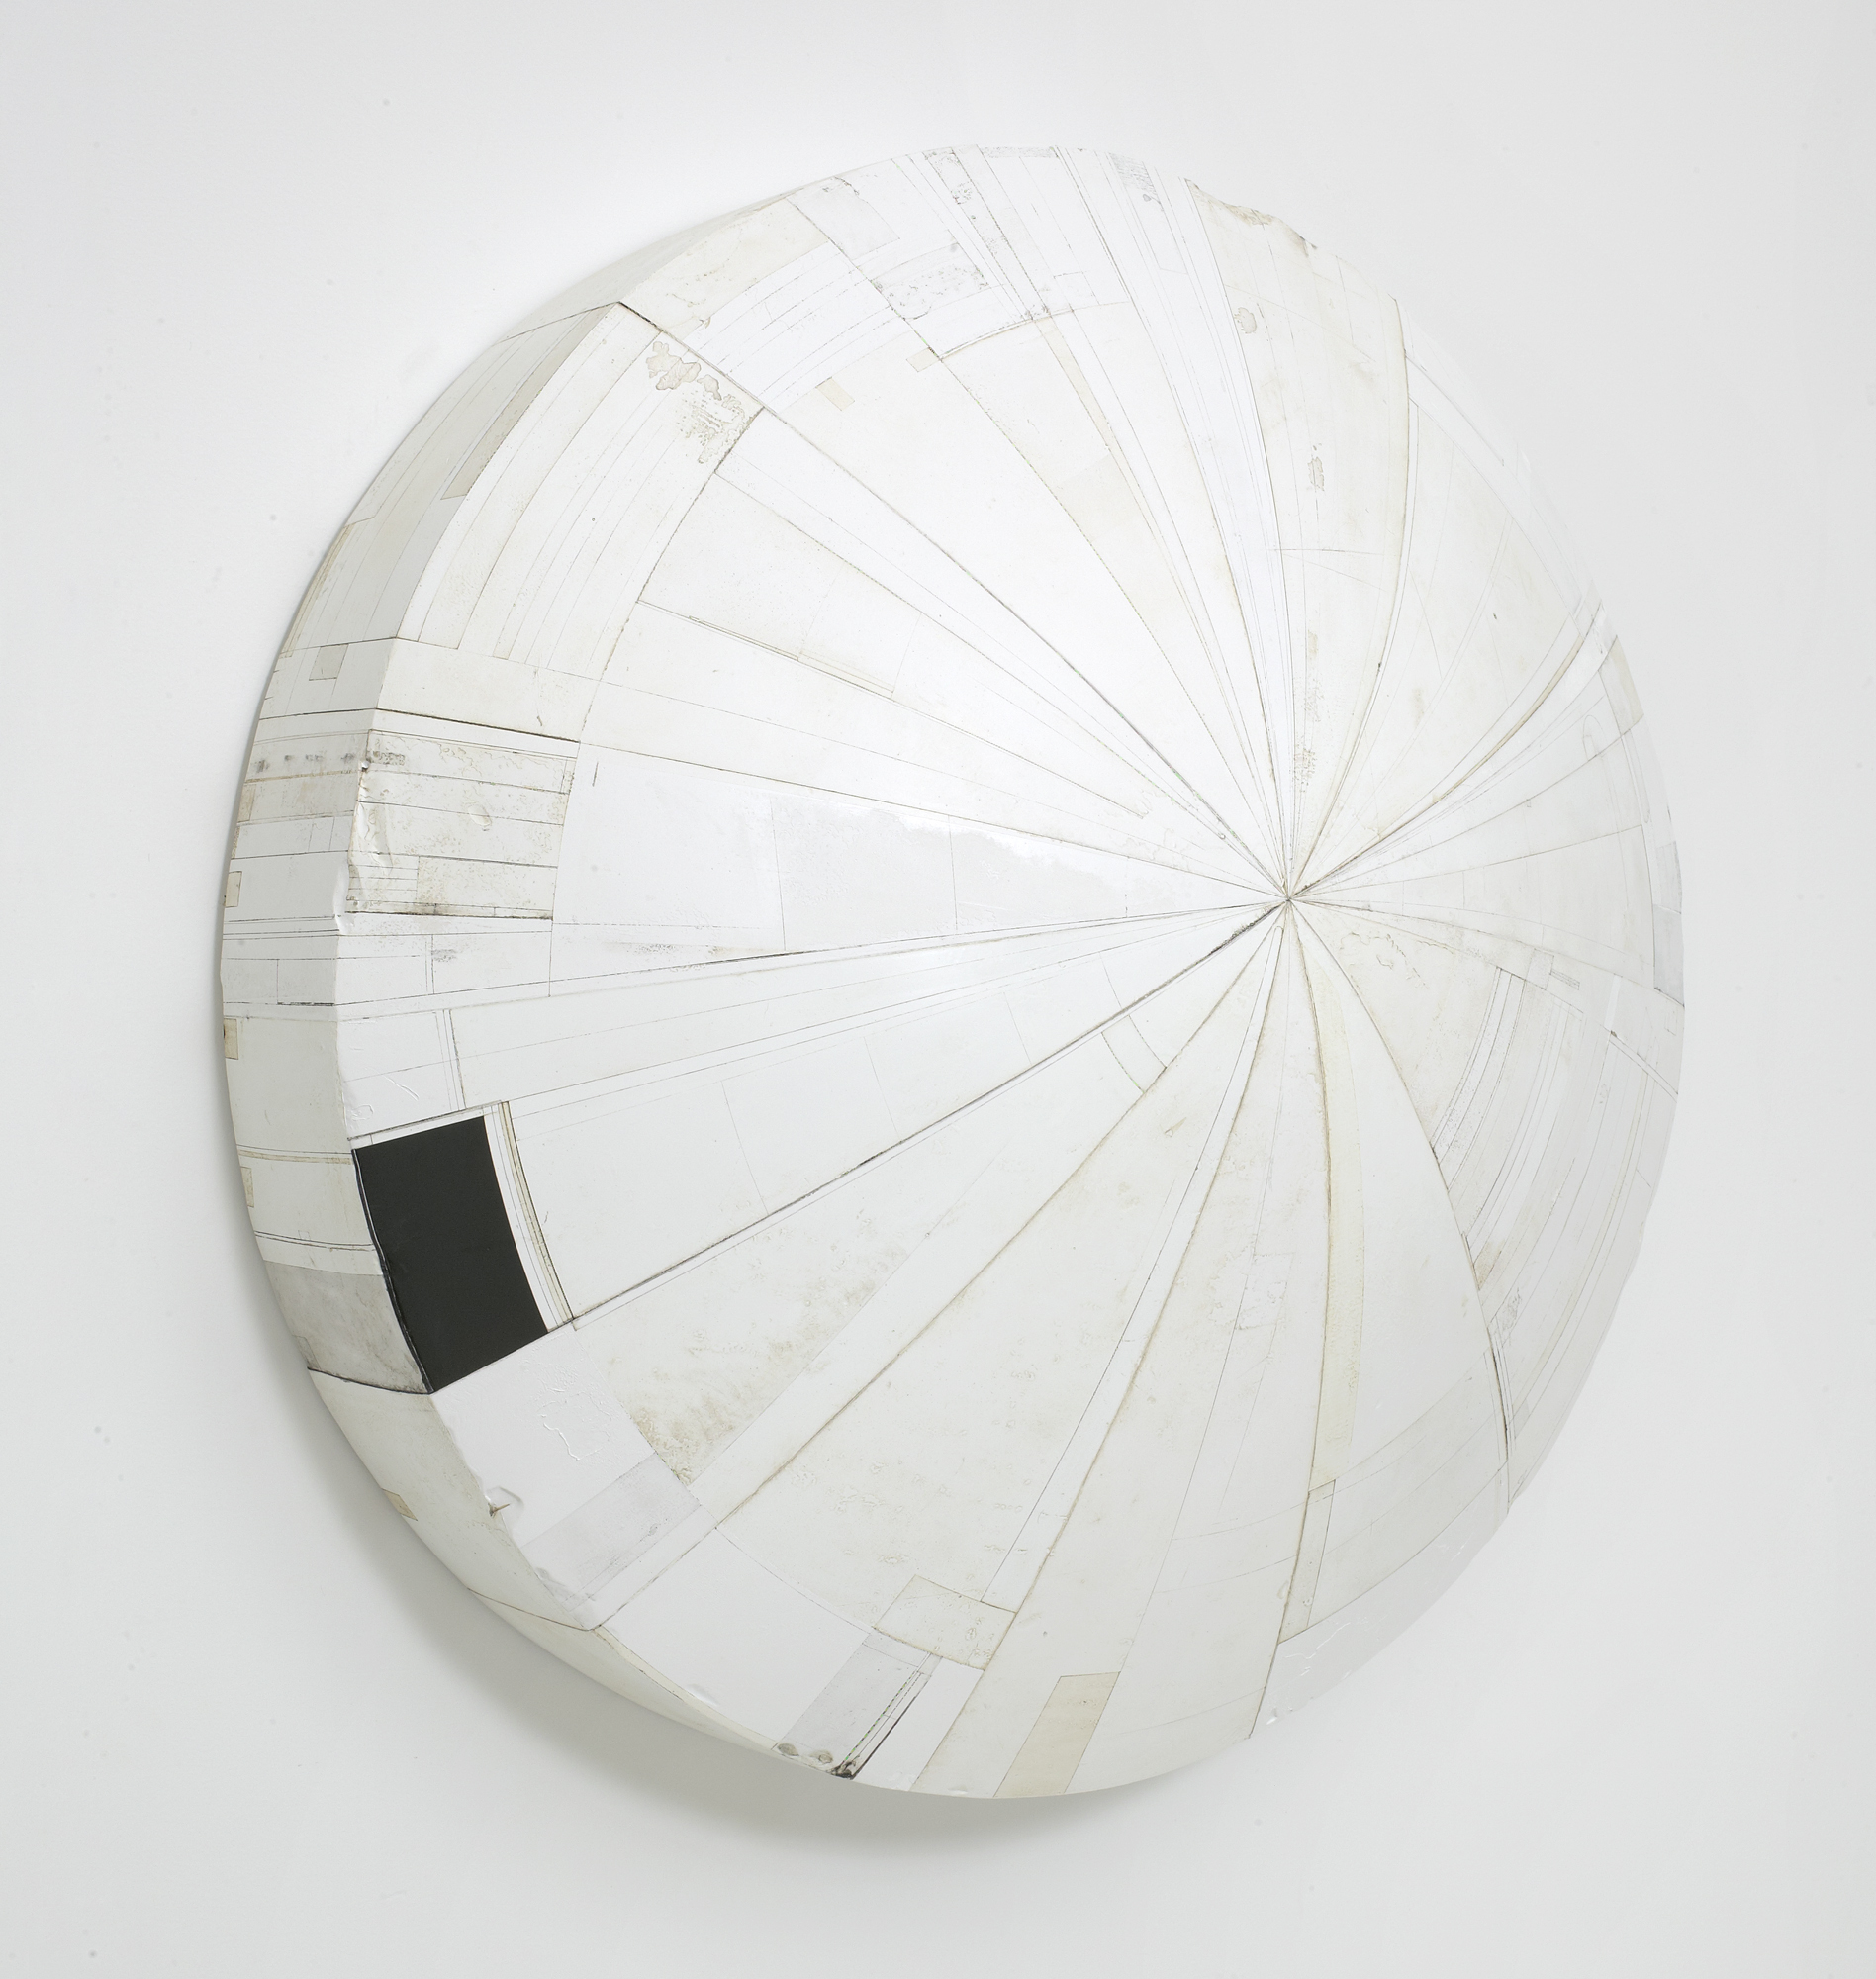 #53, 2005-2008, painted plaster, 38 x 14.5 in